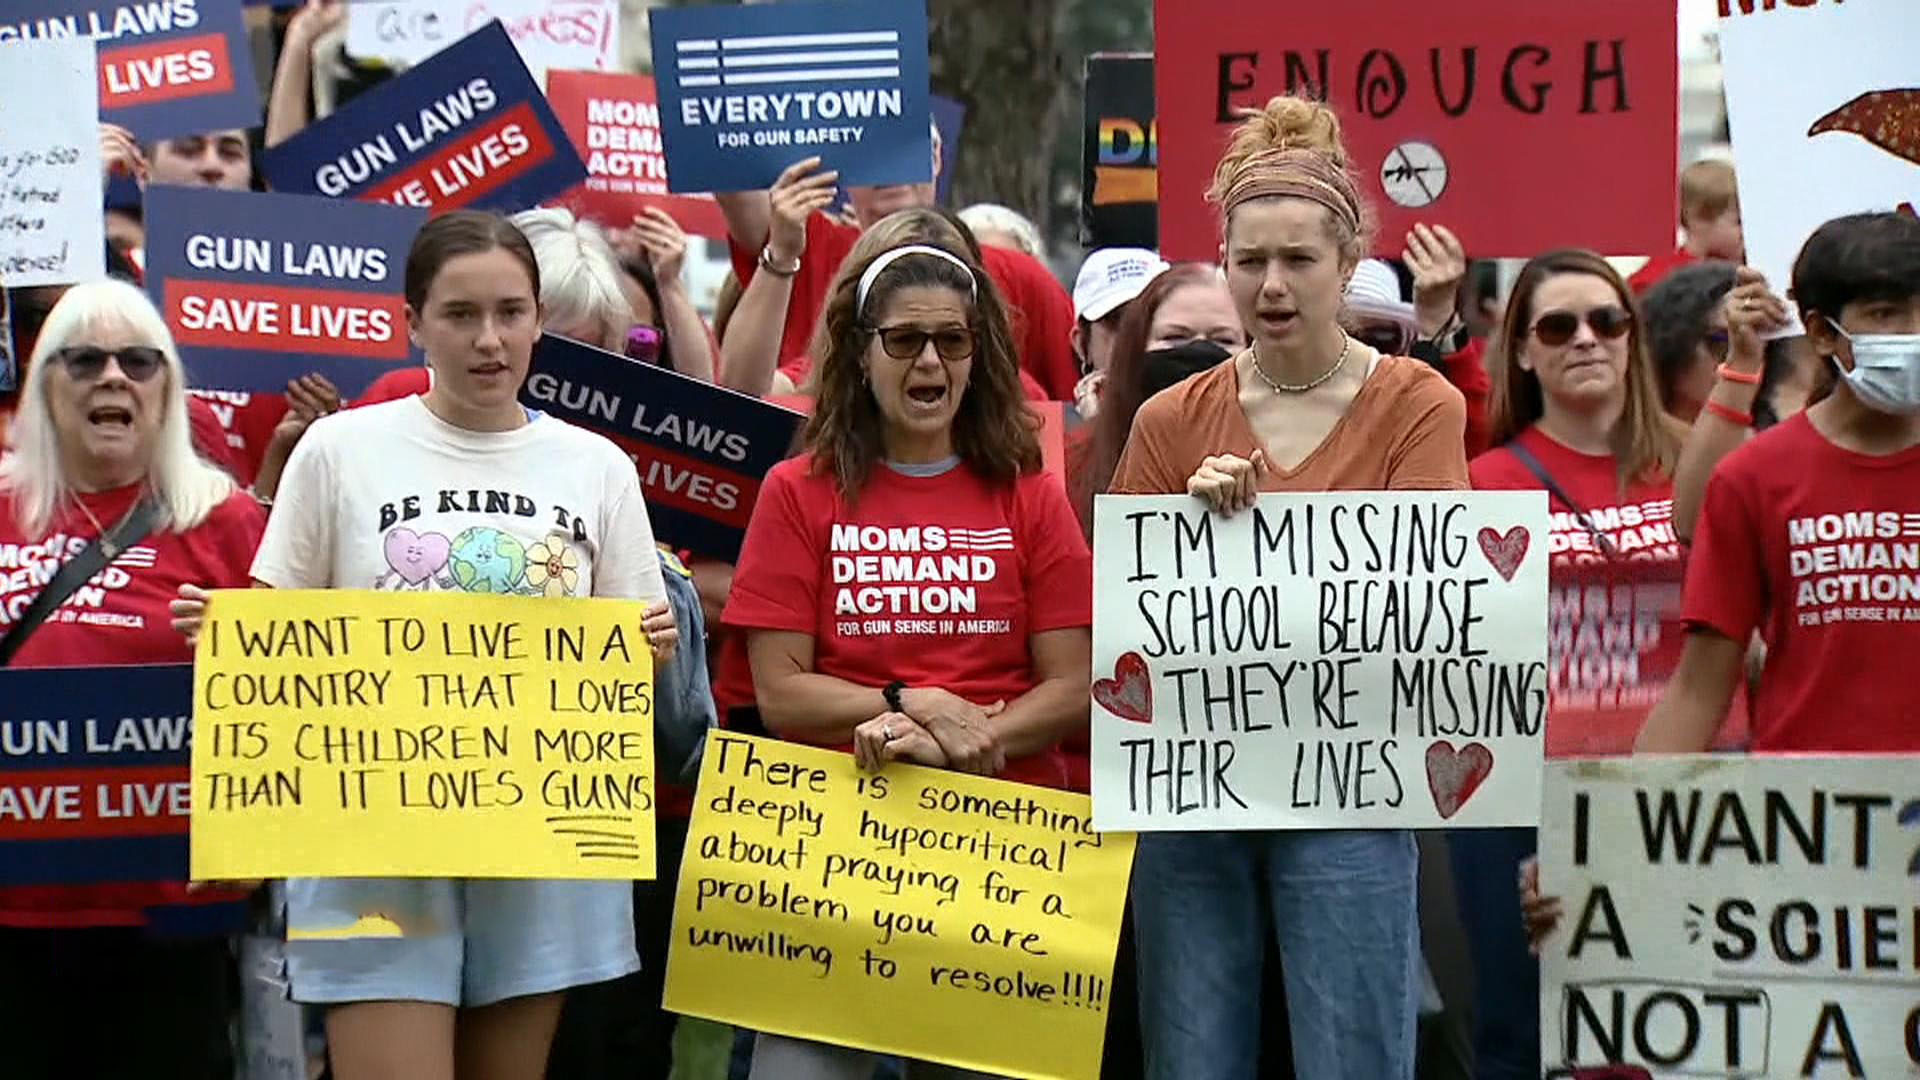 Watch CBS Saturday Morning Protestors to march for gun reform Full